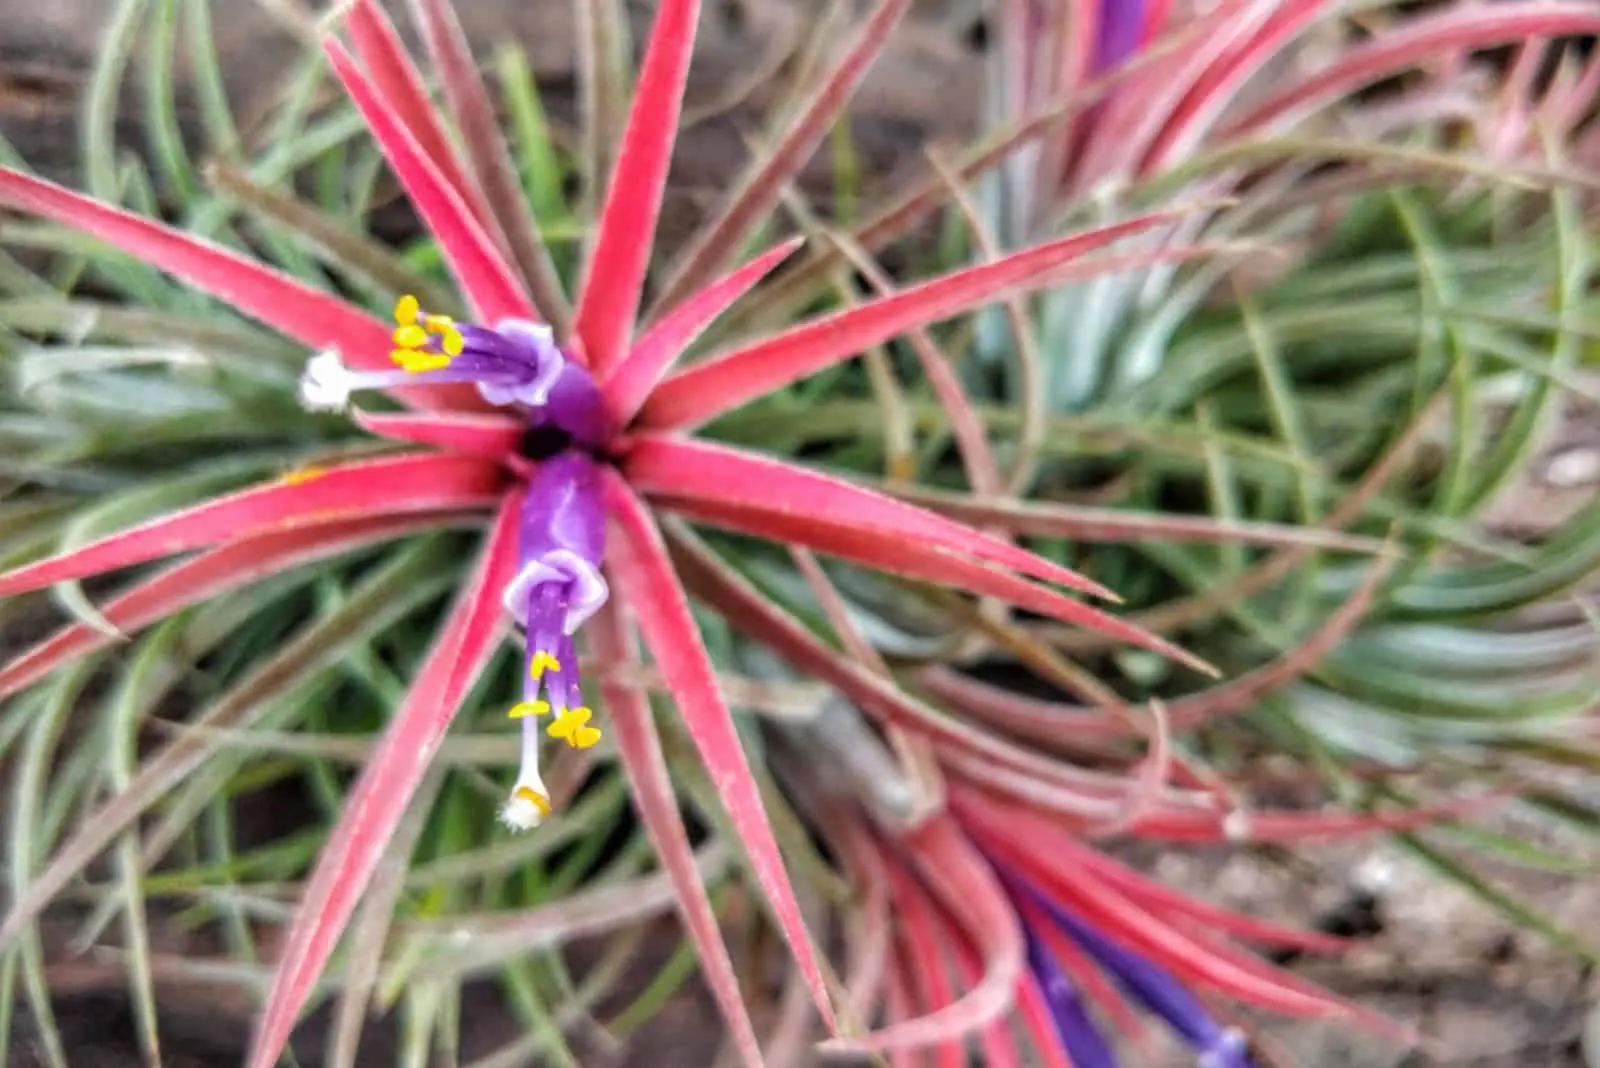 Air plant Tillandsia ionantha work well in a variety of displays